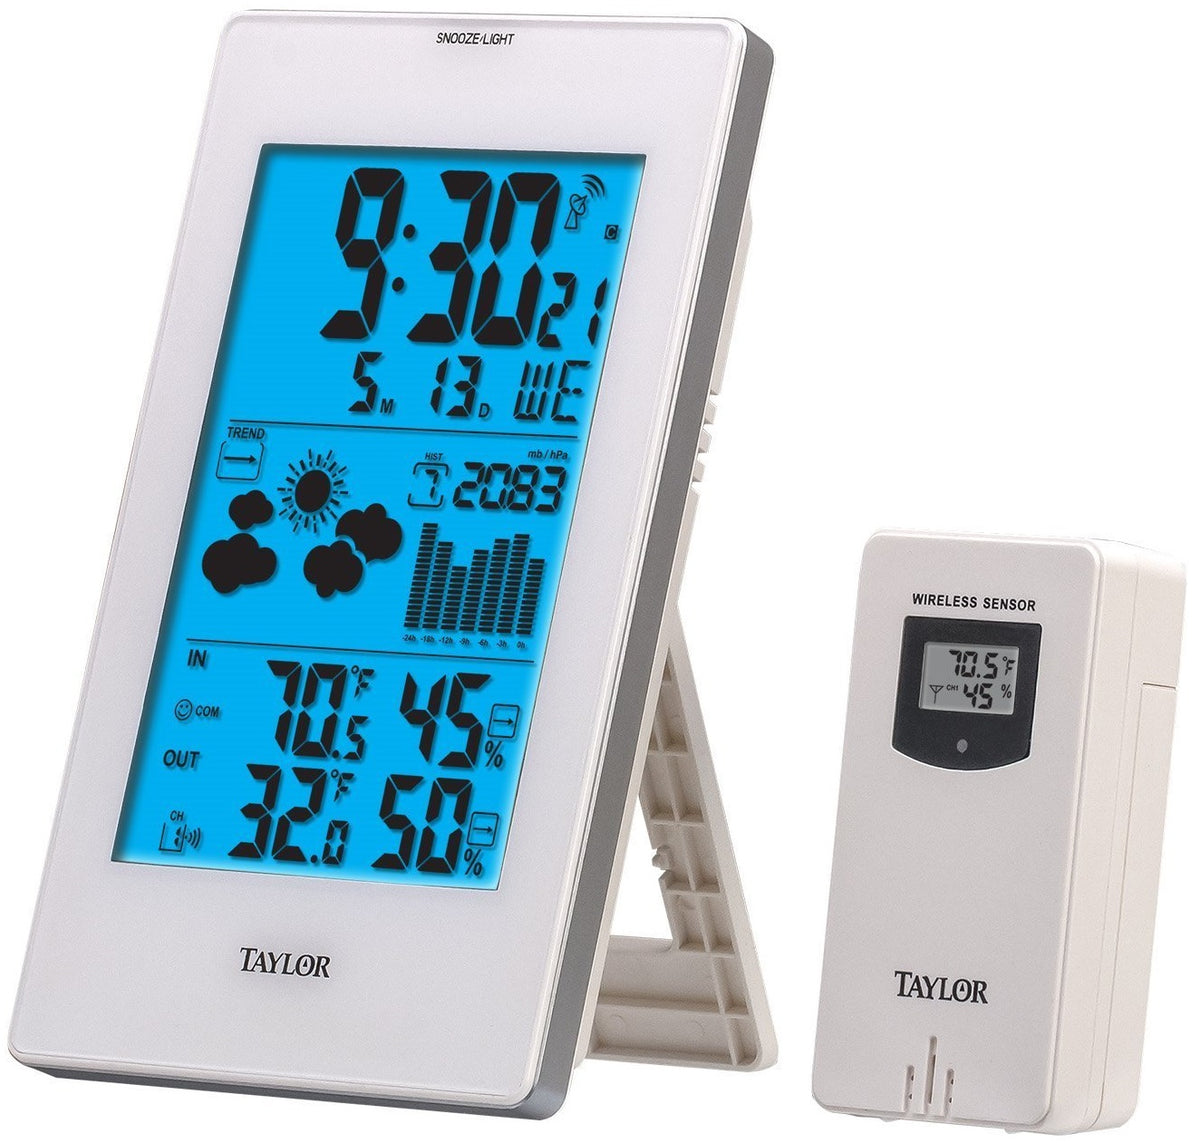 buy weather instruments at cheap rate in bulk. wholesale & retail household décor items store.